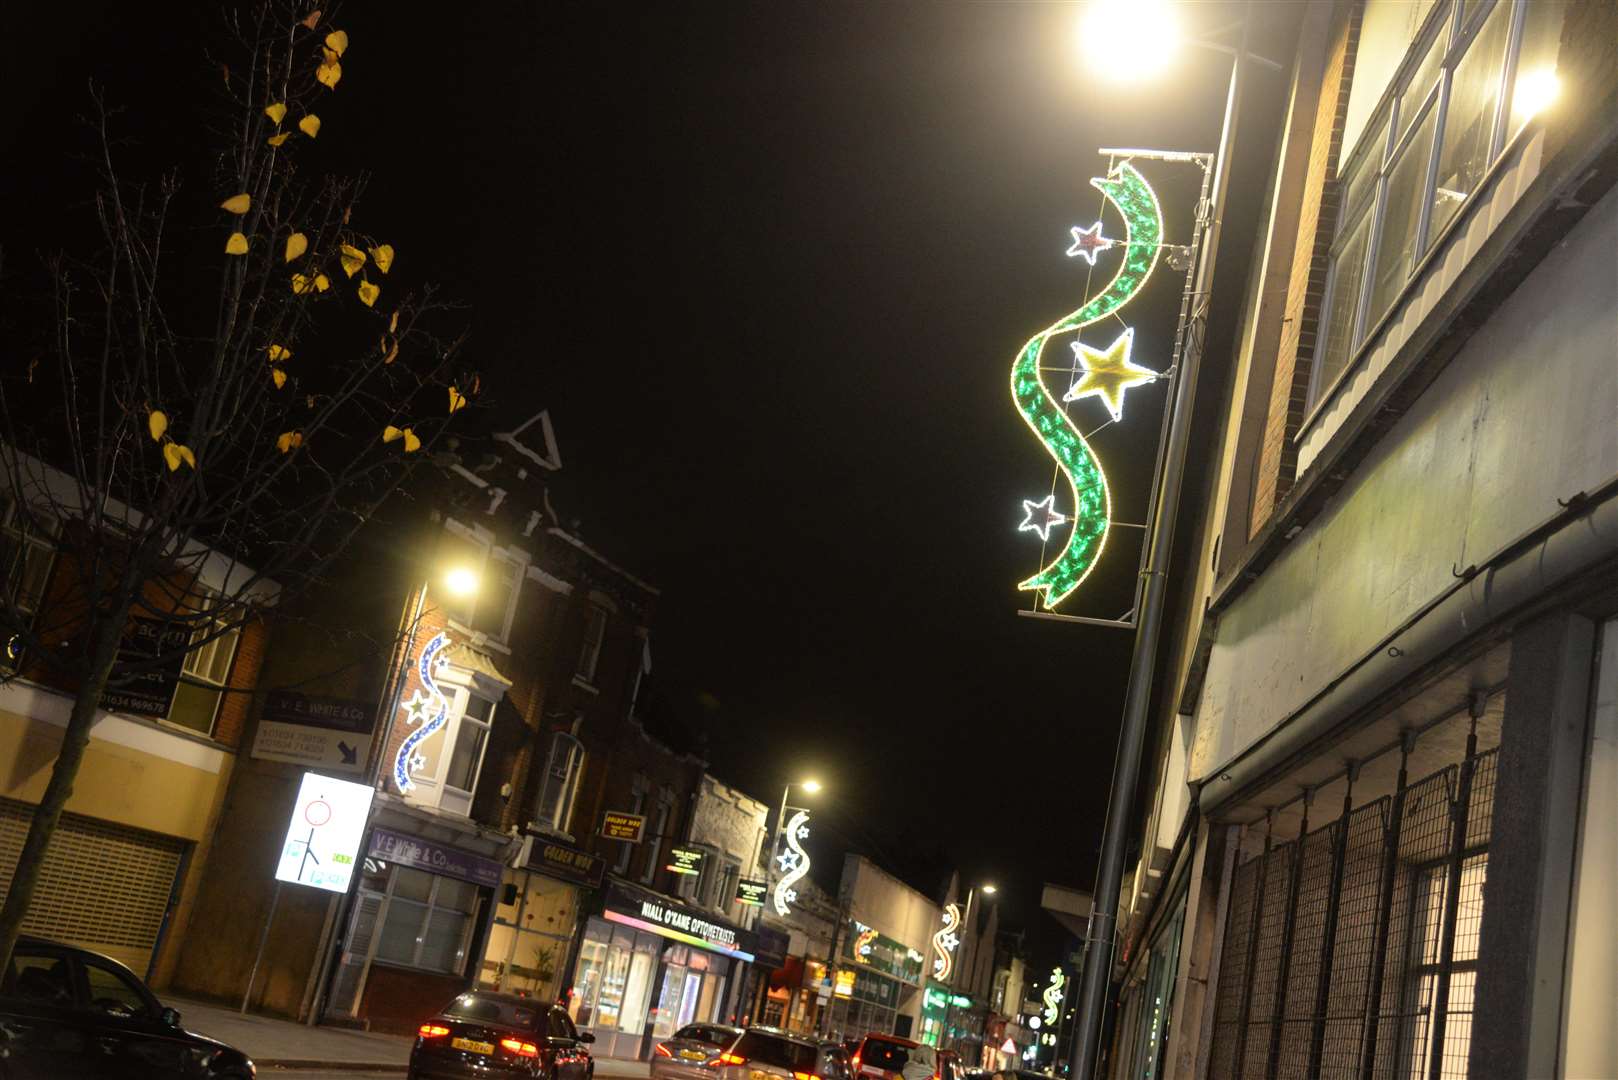 The Christmas Lights in Strood on Friday evening. Picture: Chris Davey